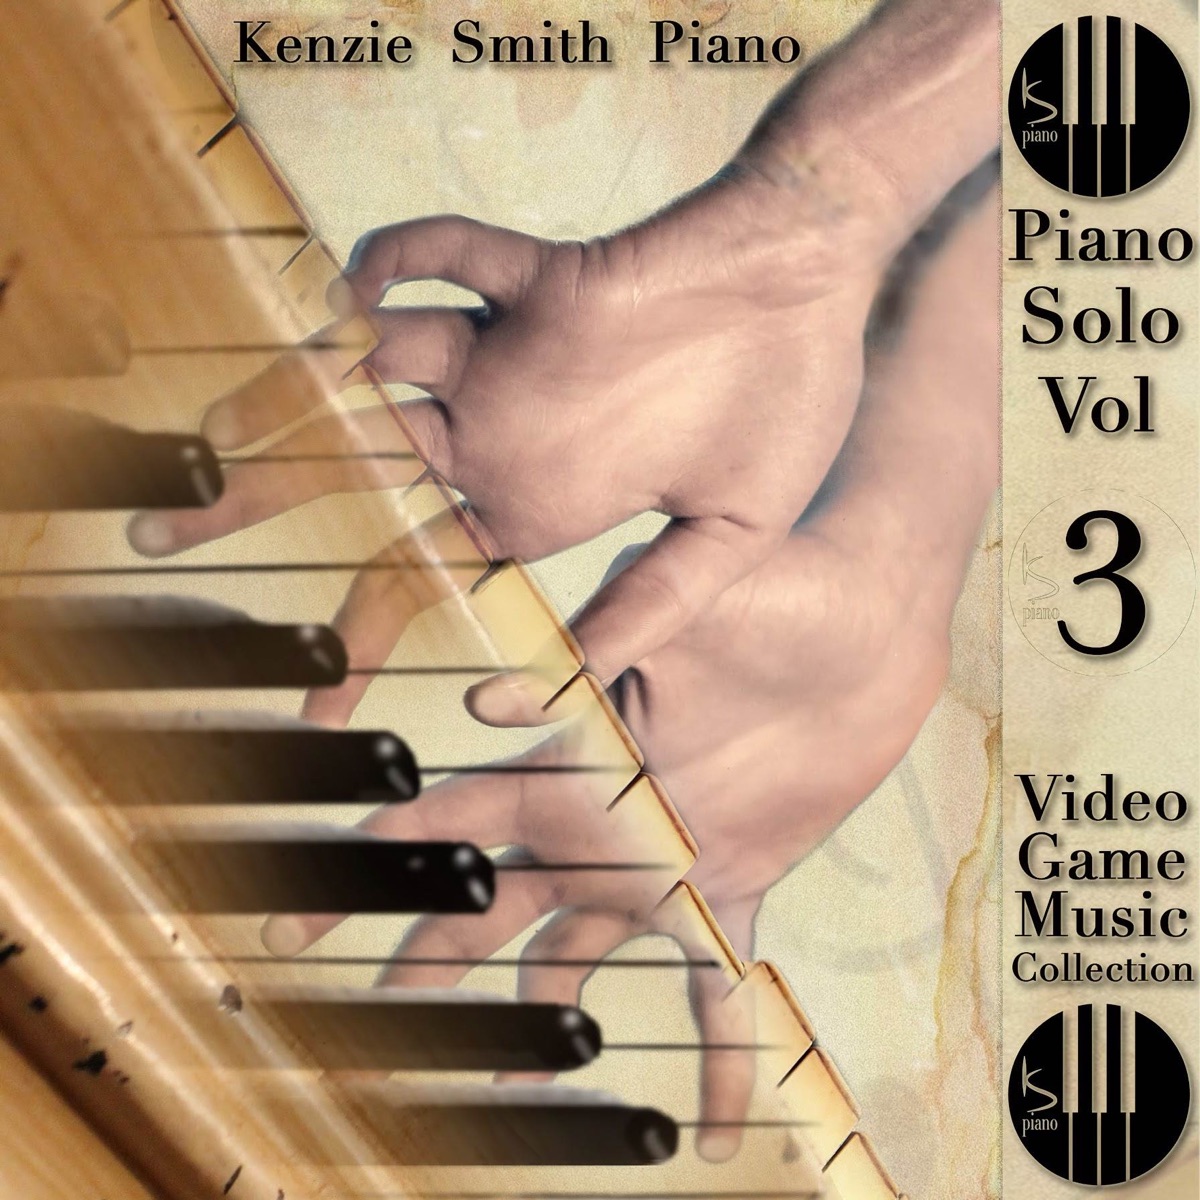 Video Game Music Collection: Piano Solo, Vol. 3 by Kenzie Smith Piano on  Apple Music